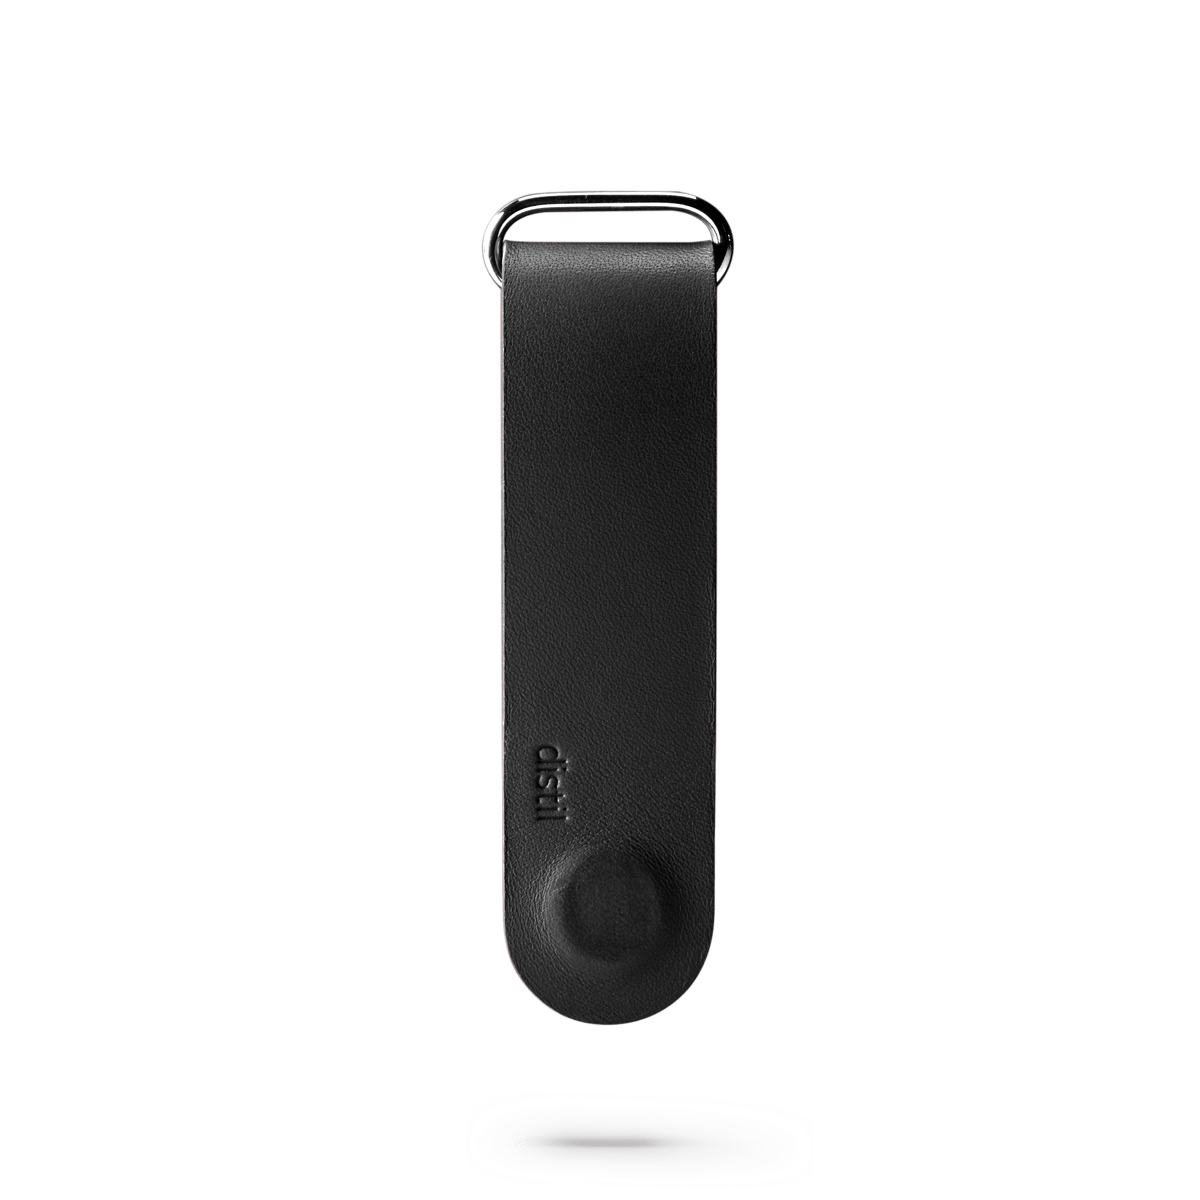 distil black leather keyloop cover with fobring attached on top